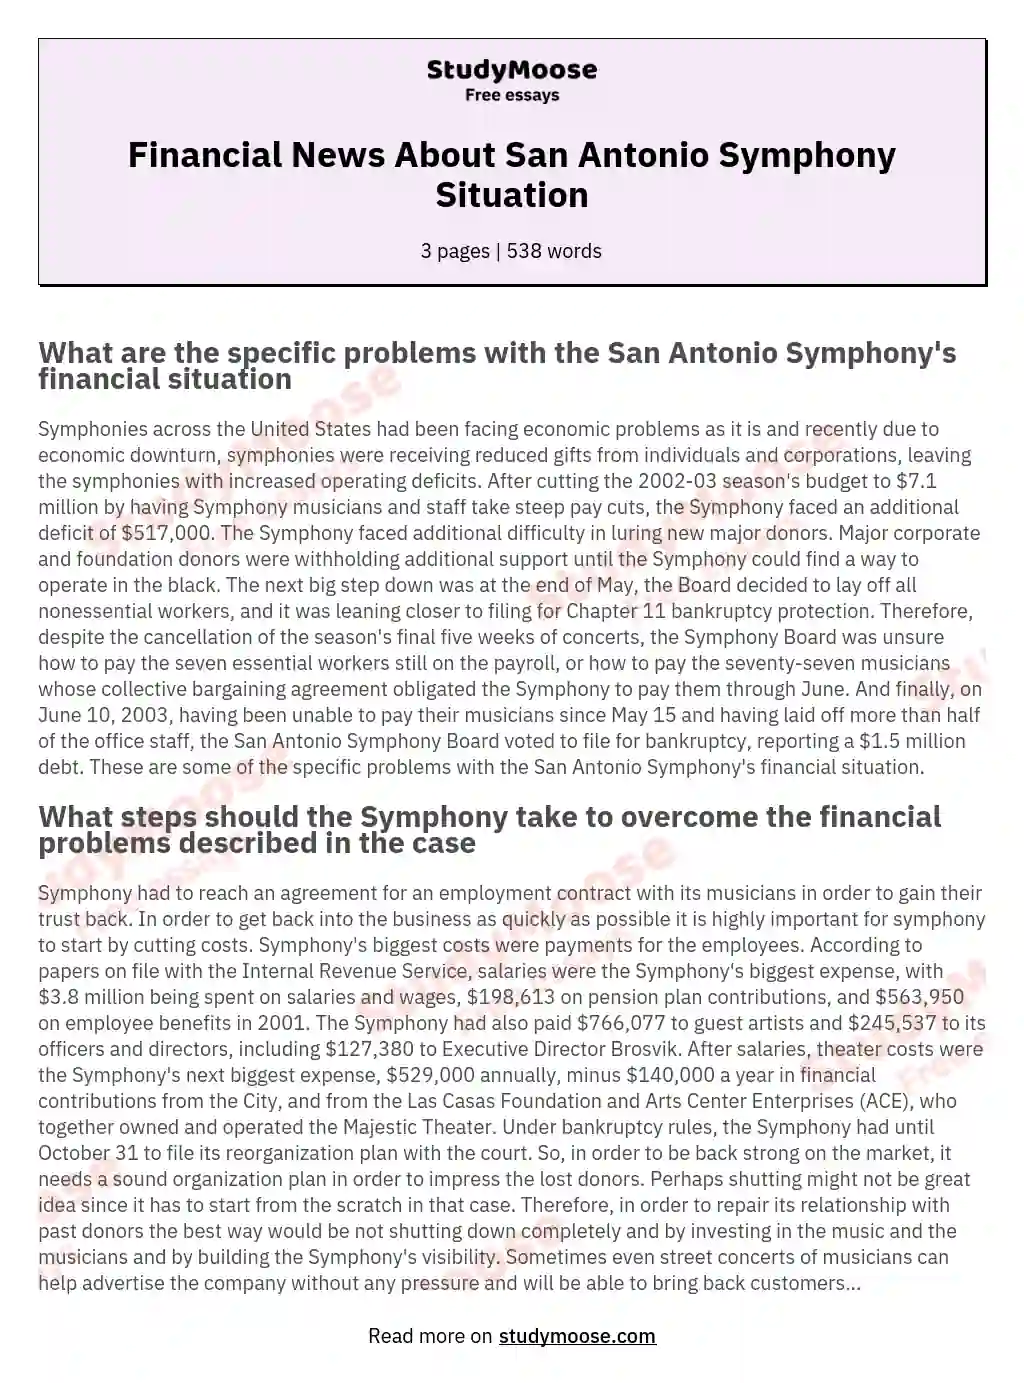 Financial News About San Antonio Symphony Situation essay